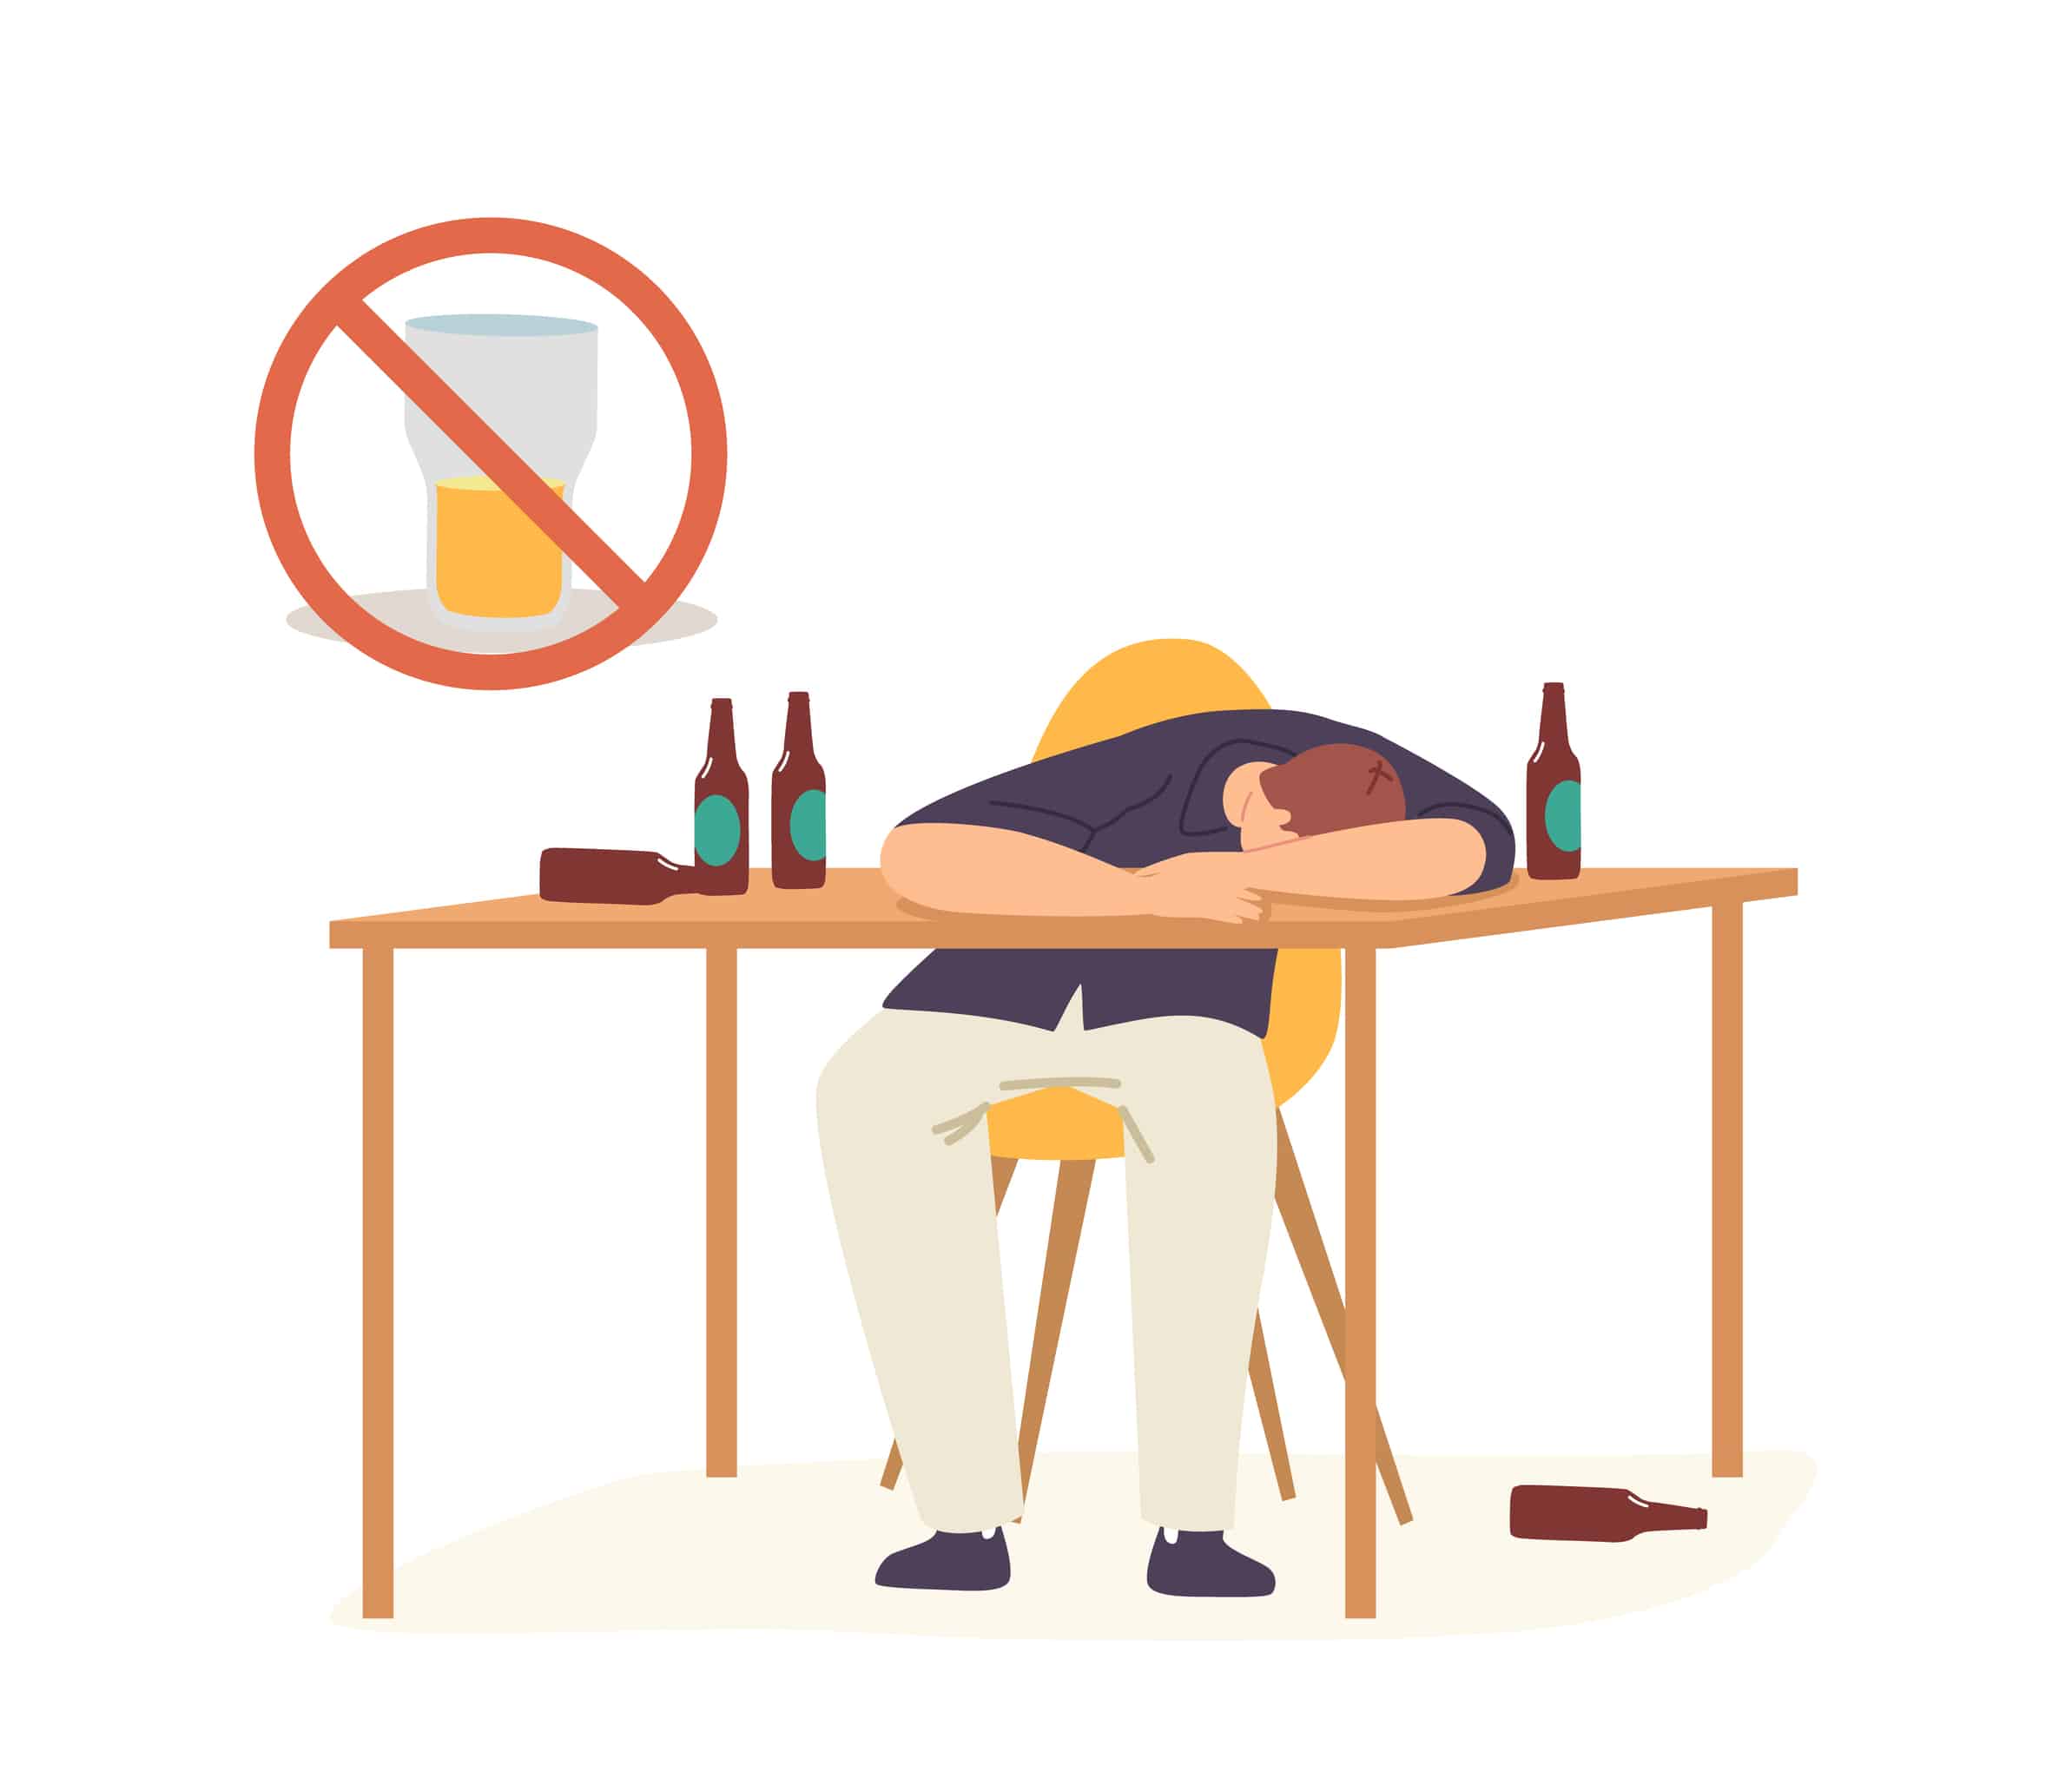 Alcoholism Concept. Drunk Man Hangover Syndrome due to Alcohol Addiction. Male Character Sleeping on Table with Empty Bottles around. Pernicious Habits, Substance Abuse. Cartoon Vector Illustration